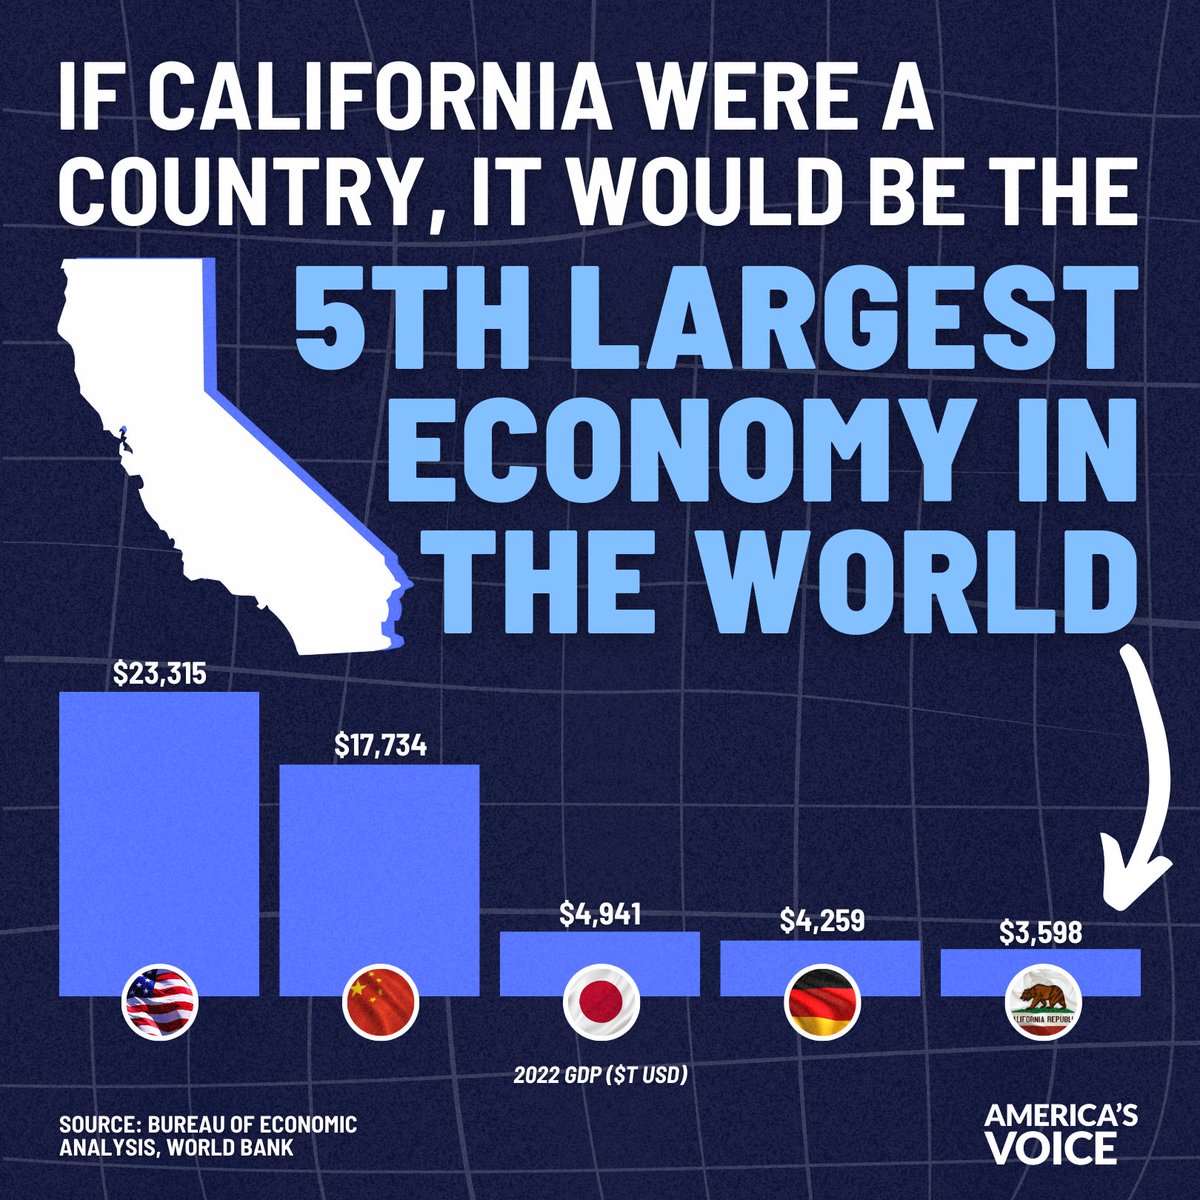 Republicans are debating in California, a state that has the 5th largest economy in the world - and the most immigrants. Immigrants make California work. #GOPDebate #GOPExtremism